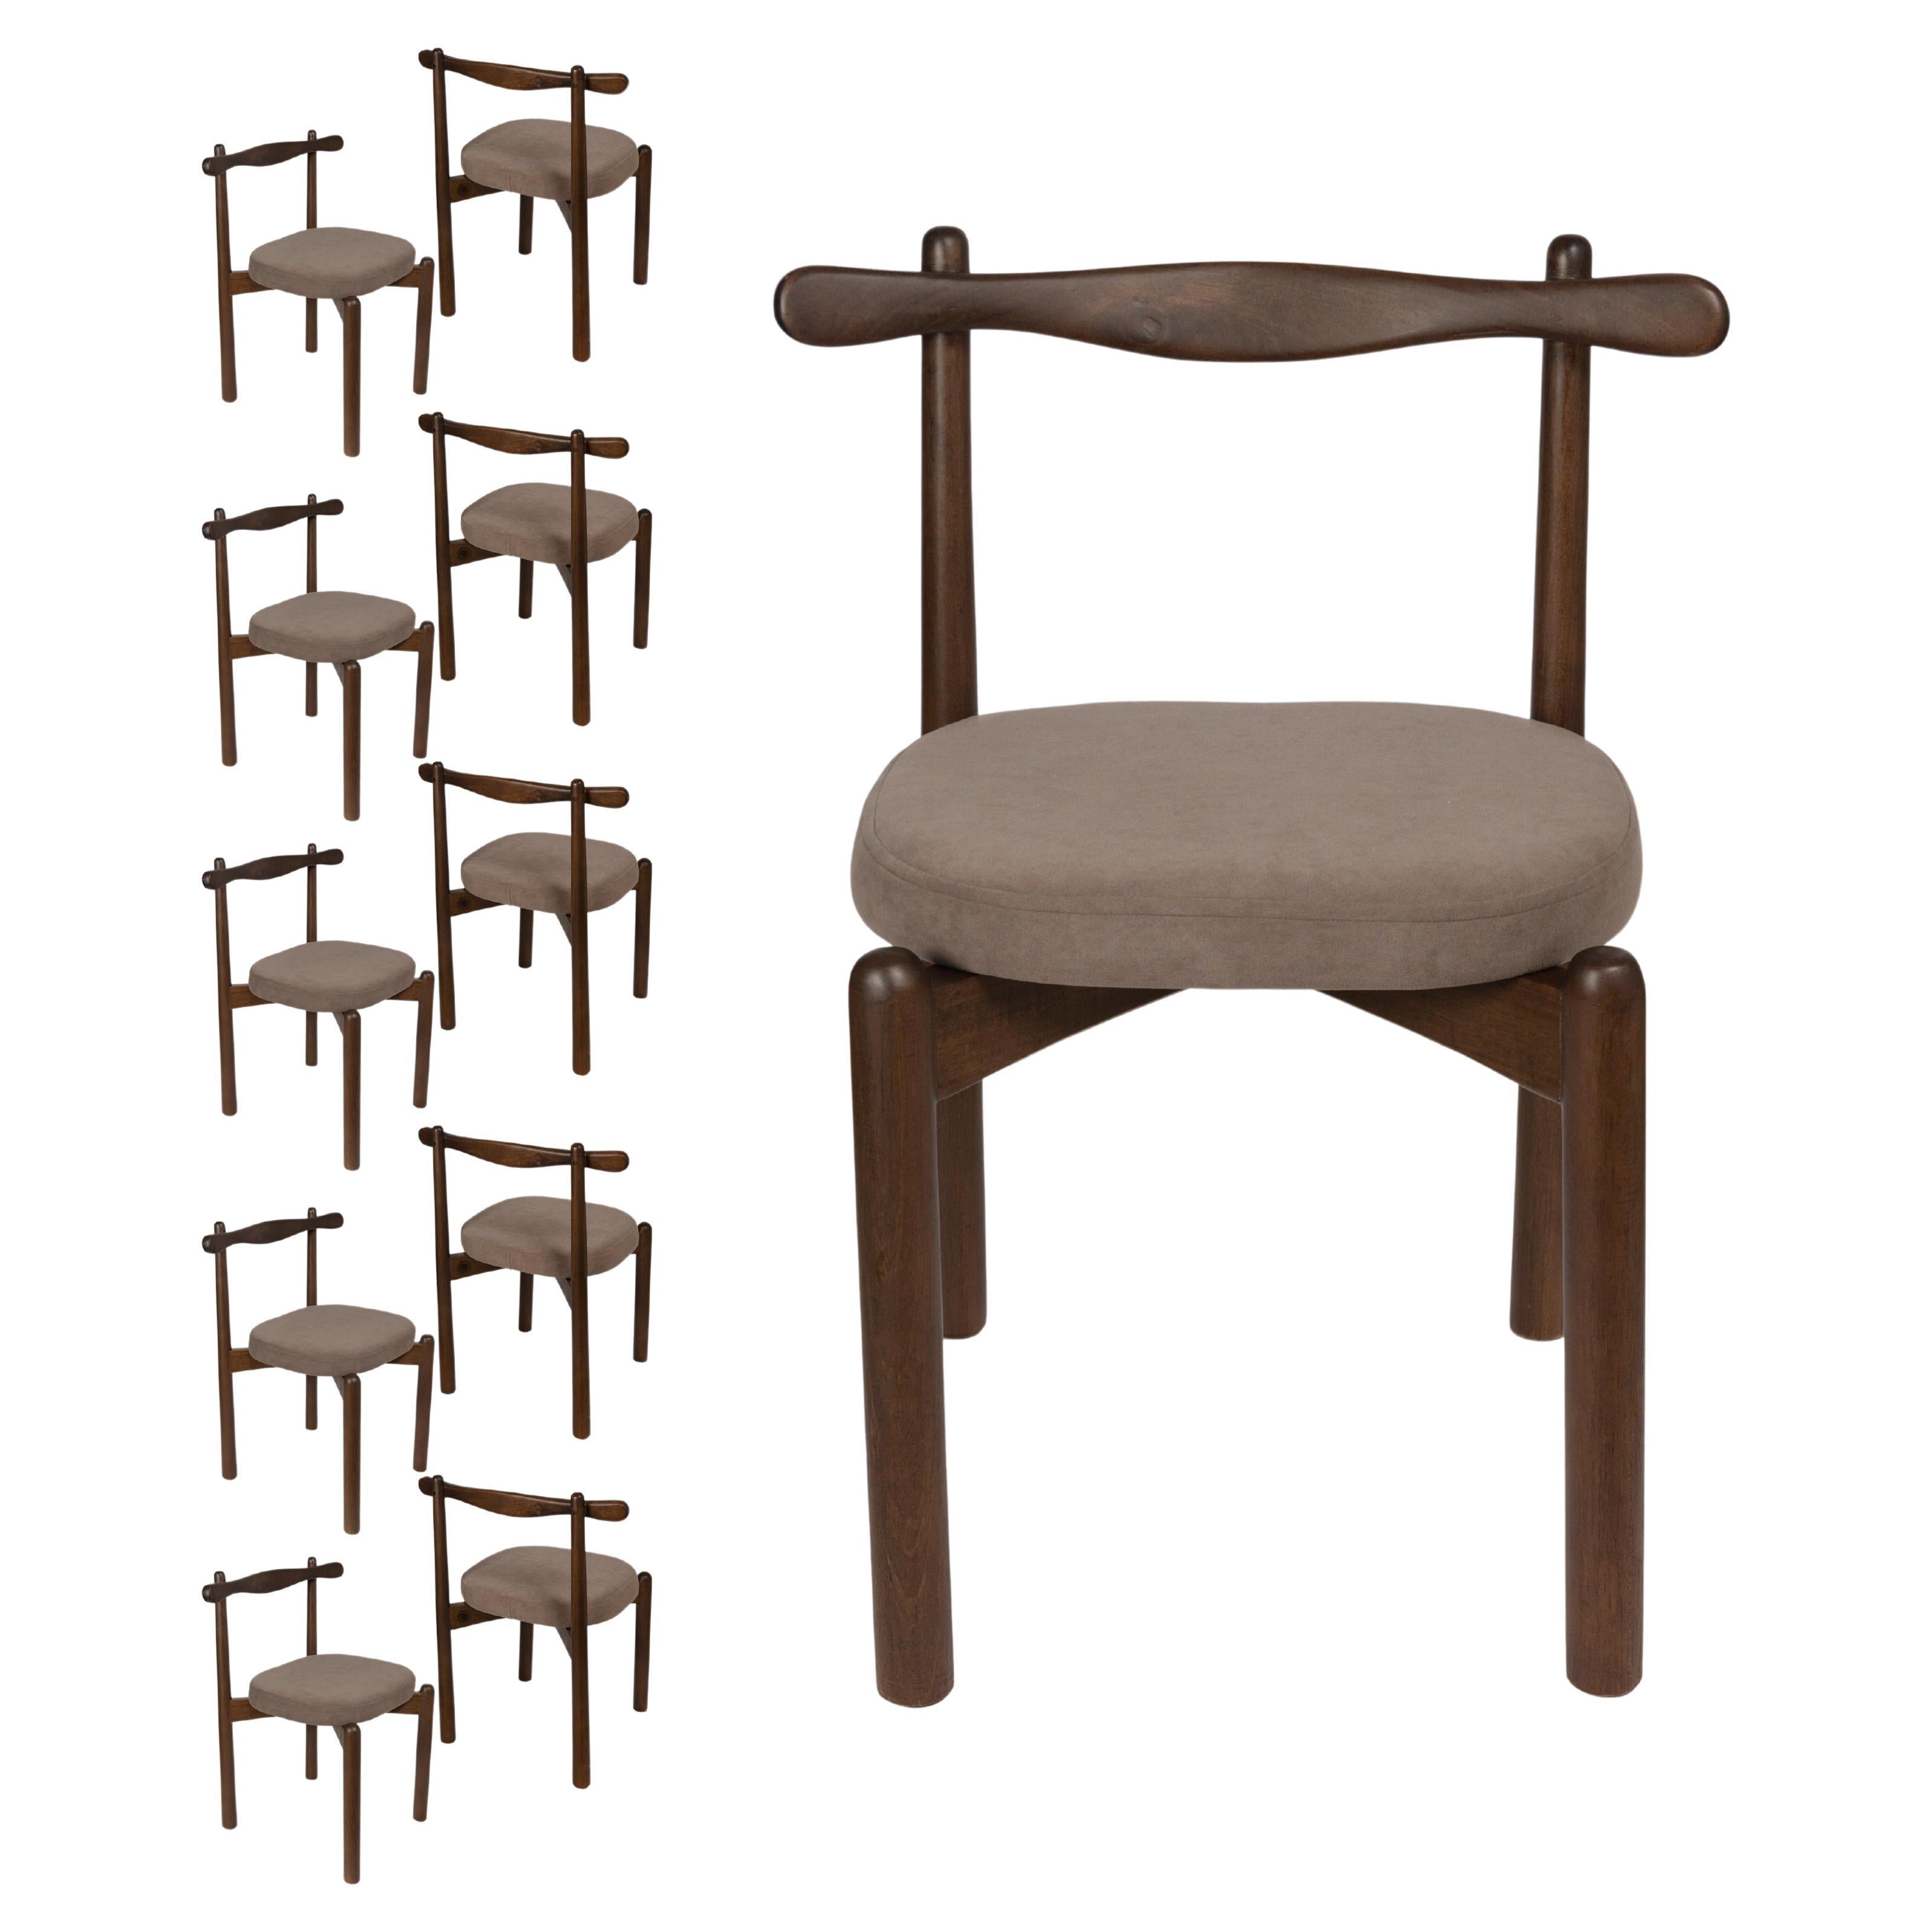 Set of 10 Dining Chairs Uçá Light Brown Wood (fabric ref : 20) For Sale